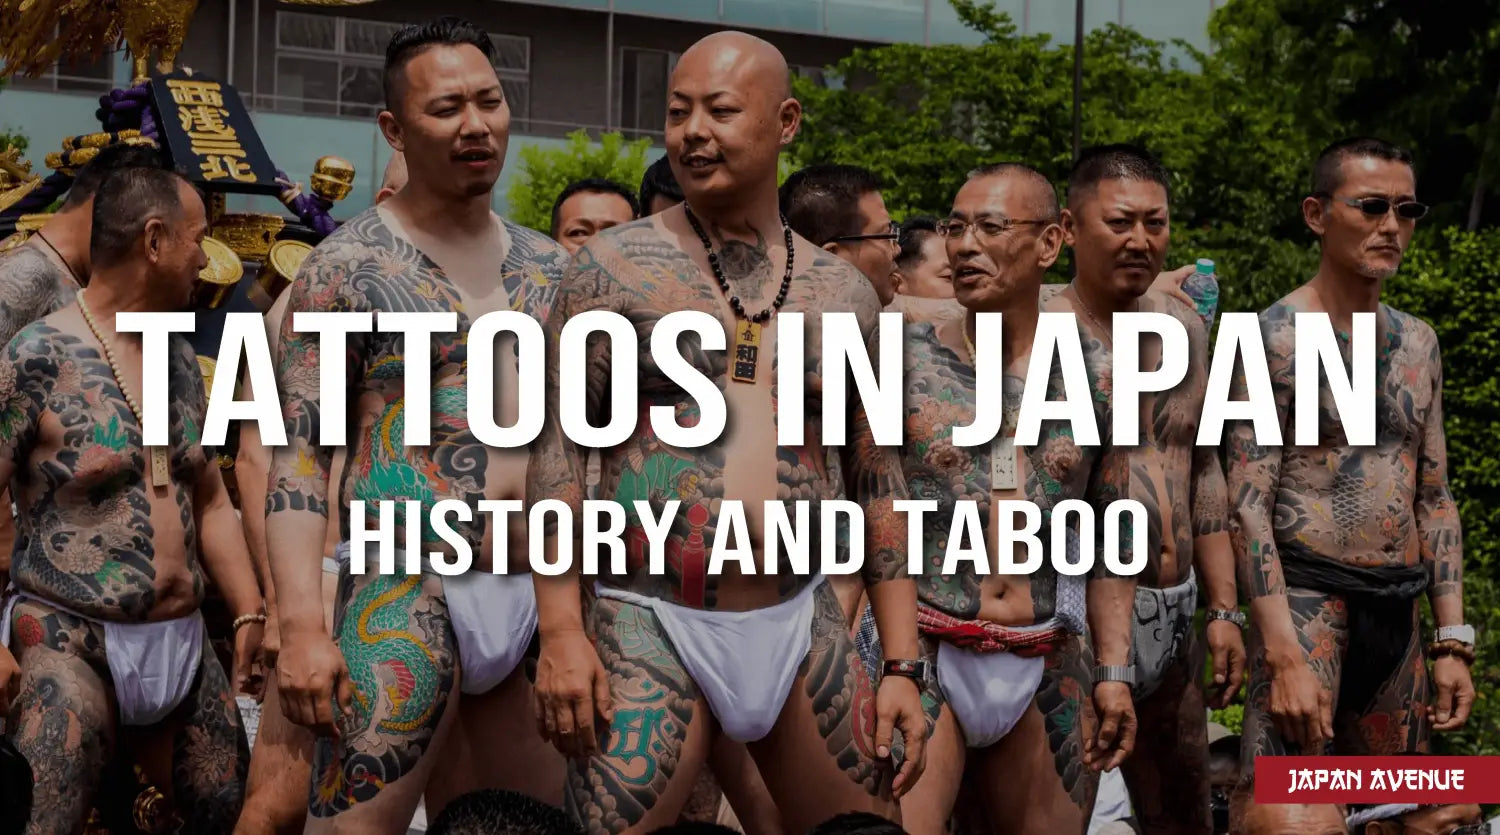 An irezumi tattoo that shows the yakuza tattoo body suit which can be  hidden under clothing